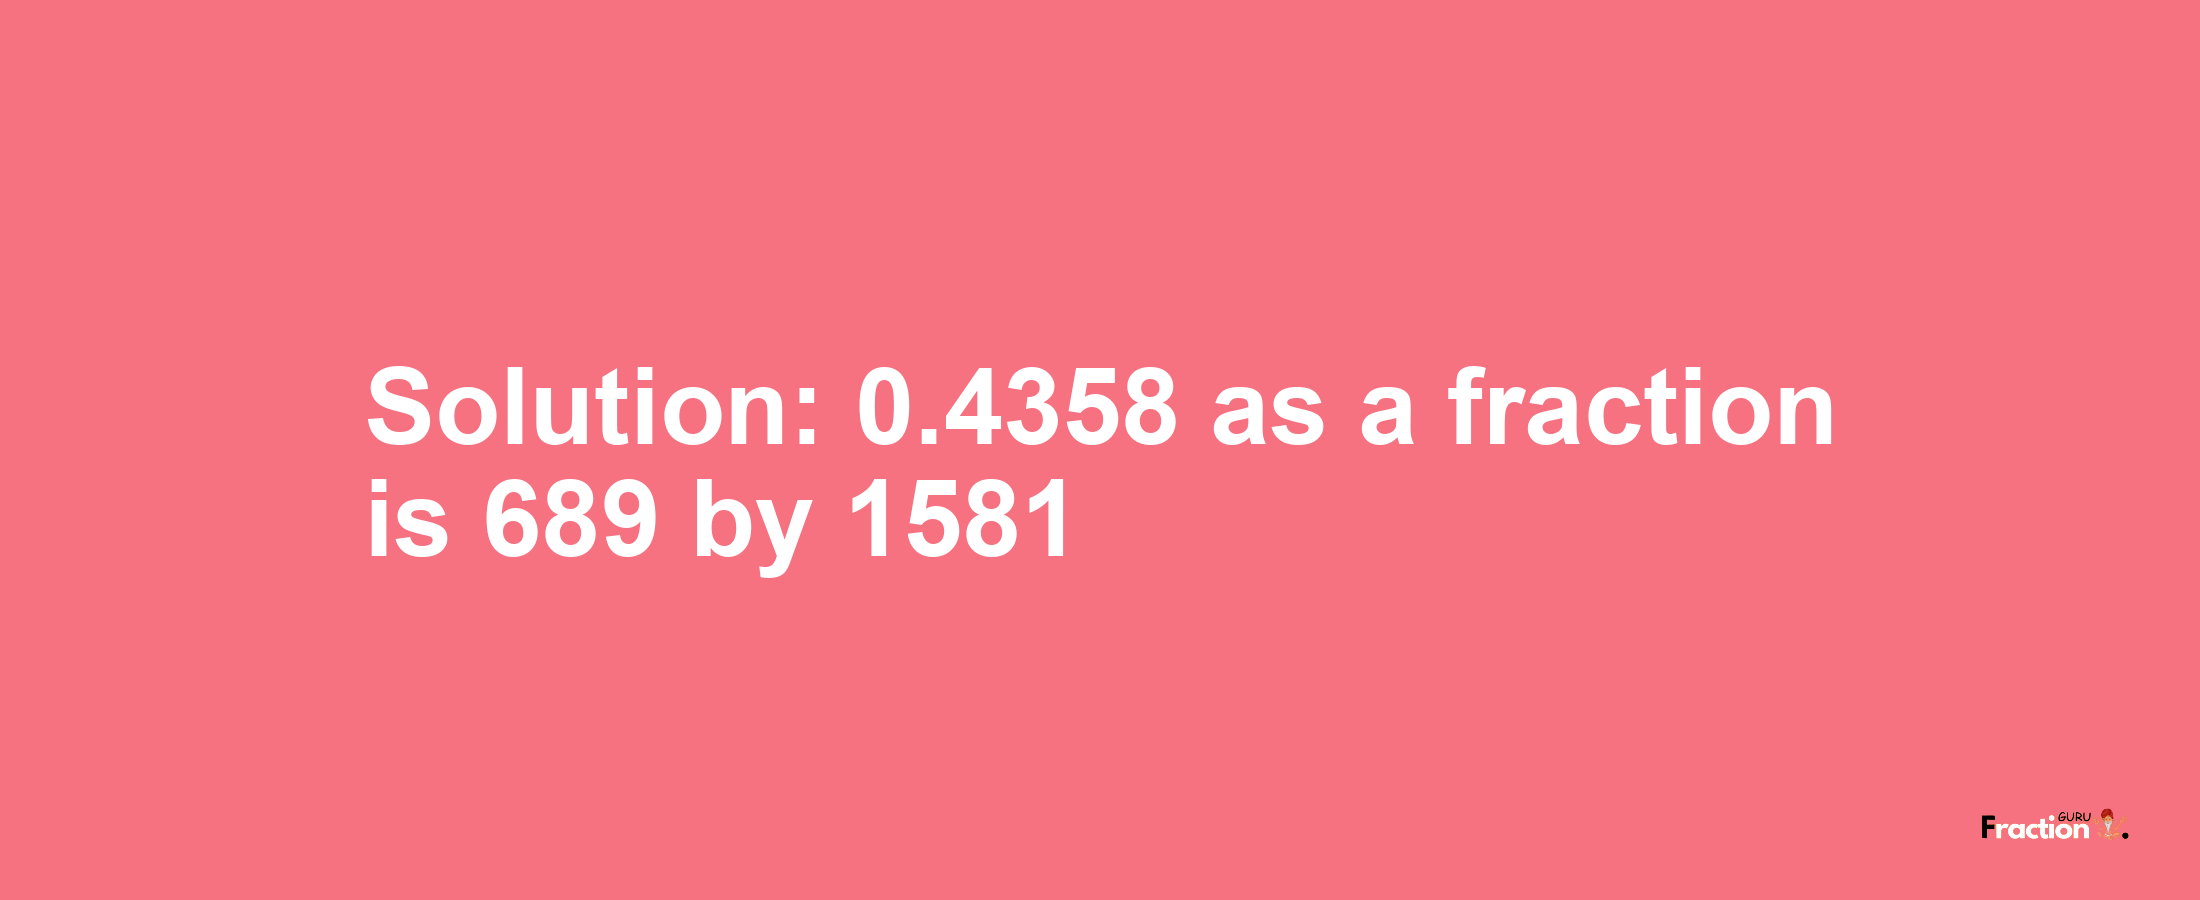 Solution:0.4358 as a fraction is 689/1581